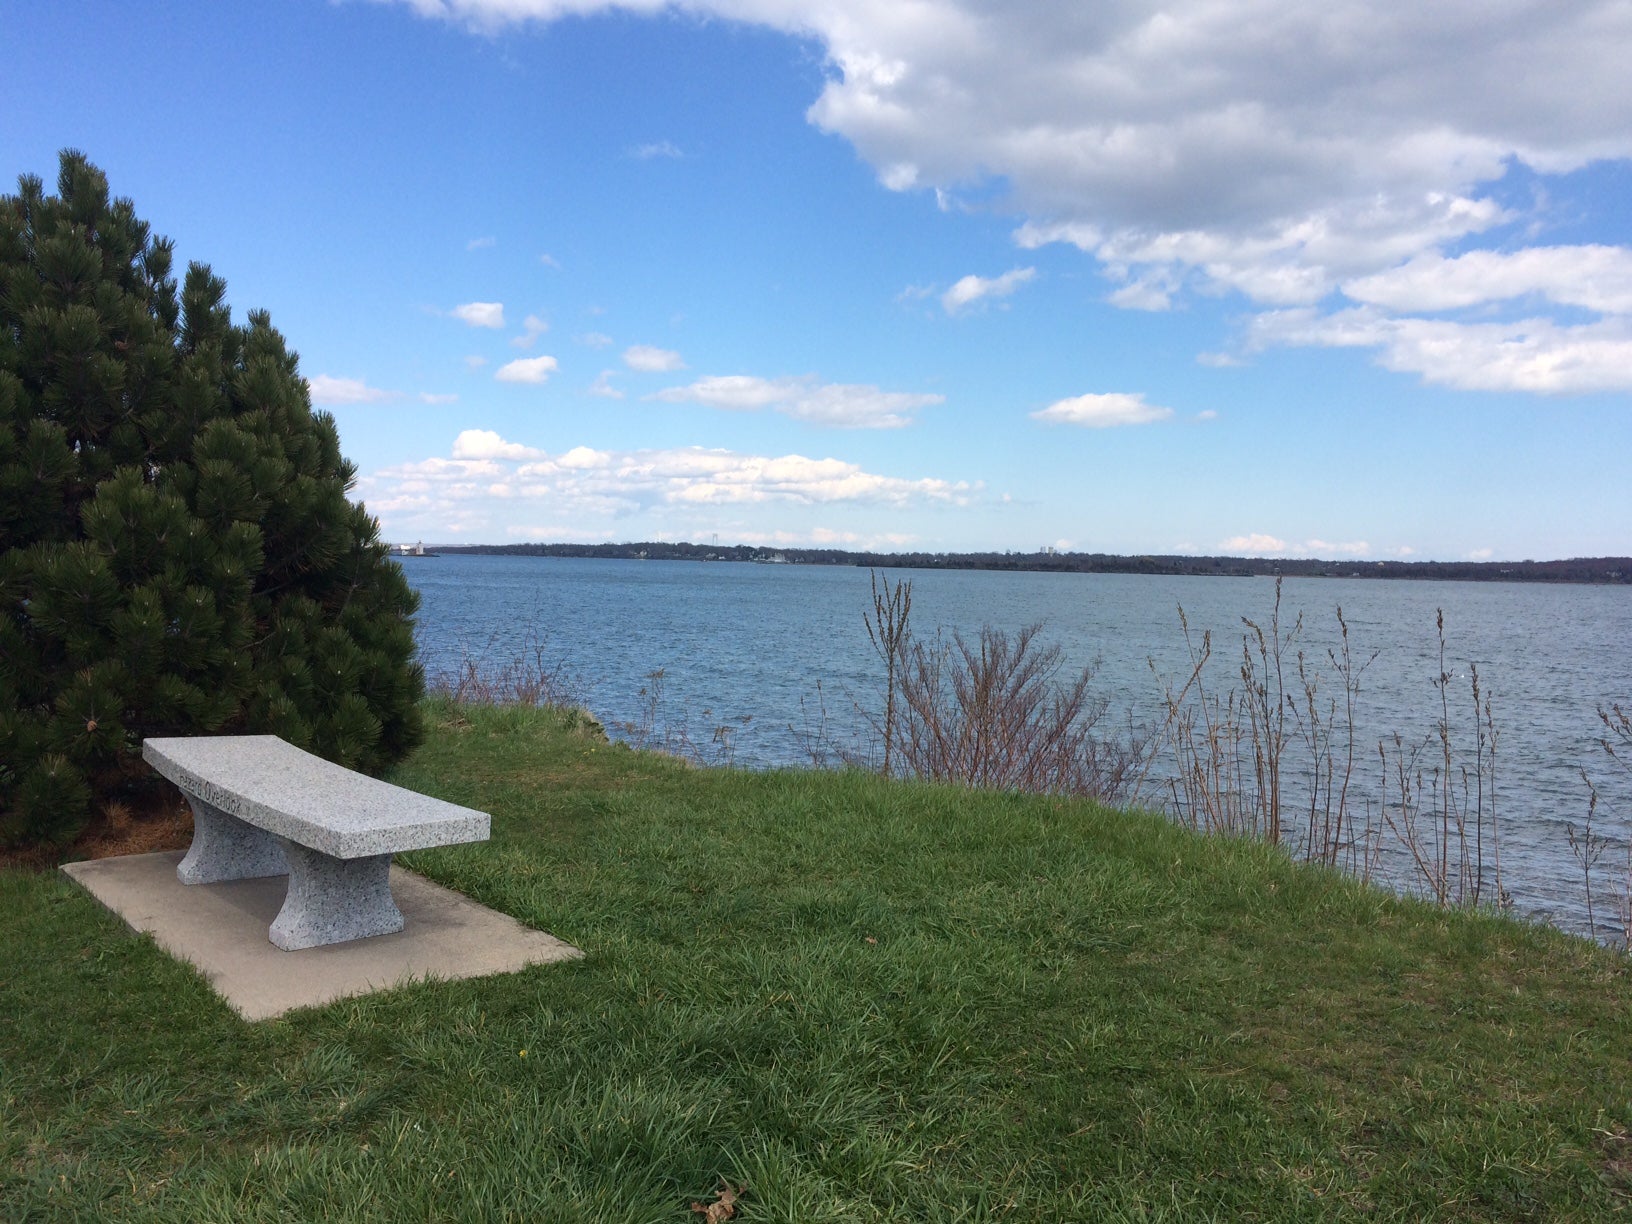 Narragansett Bay overlook with a bench in the foreground.